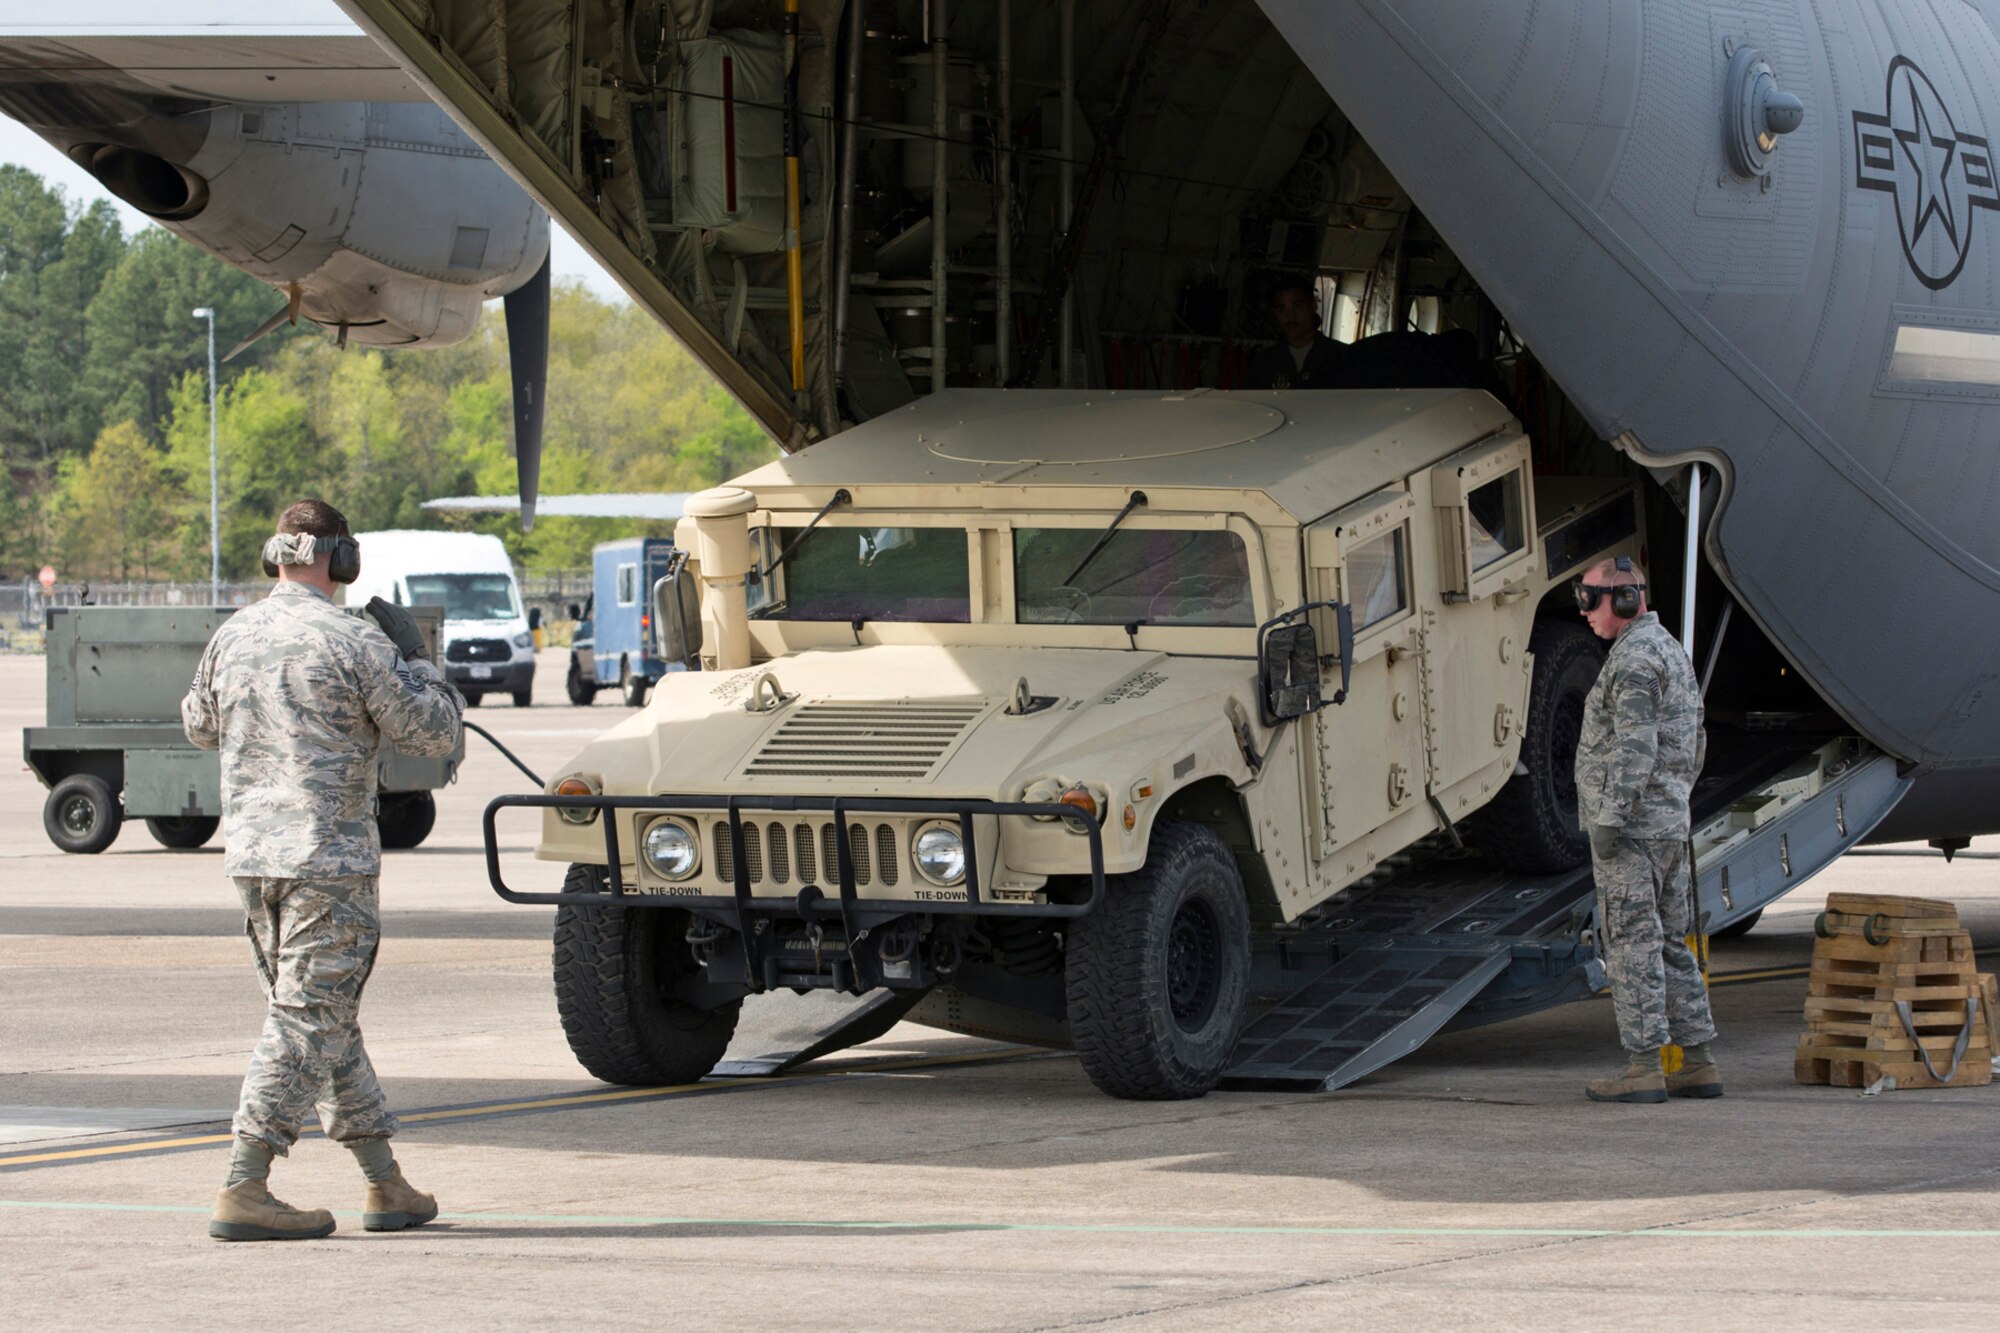 U.S. Air Force Reserve Master Sgt. Morgan Abner, air transportation craftsman, 96th Aerial Port Squadron, directs the driver of a Humvee during a training exercise April 2, 2017, at Little Rock Air Force Base, Ark. Abner is one member of a team preparing to compete in the 2017 Port Dawg Challenge for air mobility professionals, at Dobbins Air Reserve Base, Ga. (U.S. Air Force photo by Master Sgt. Jeff Walston/Released)